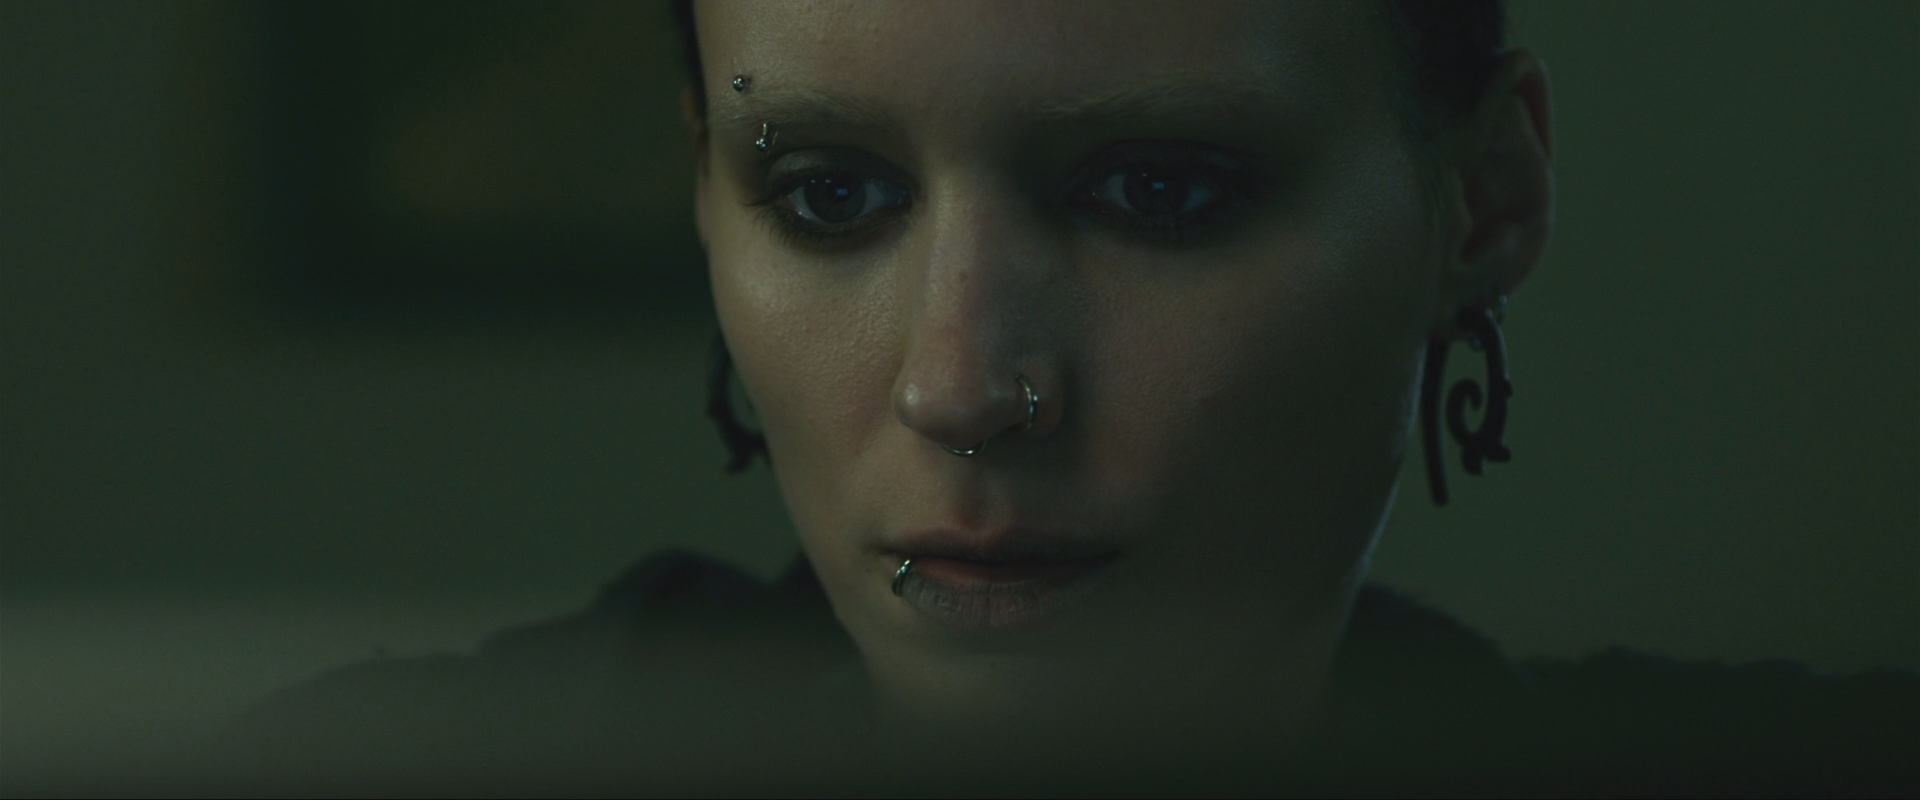 Movie The Girl With The Dragon Tattoo HD Wallpaper | Background Image